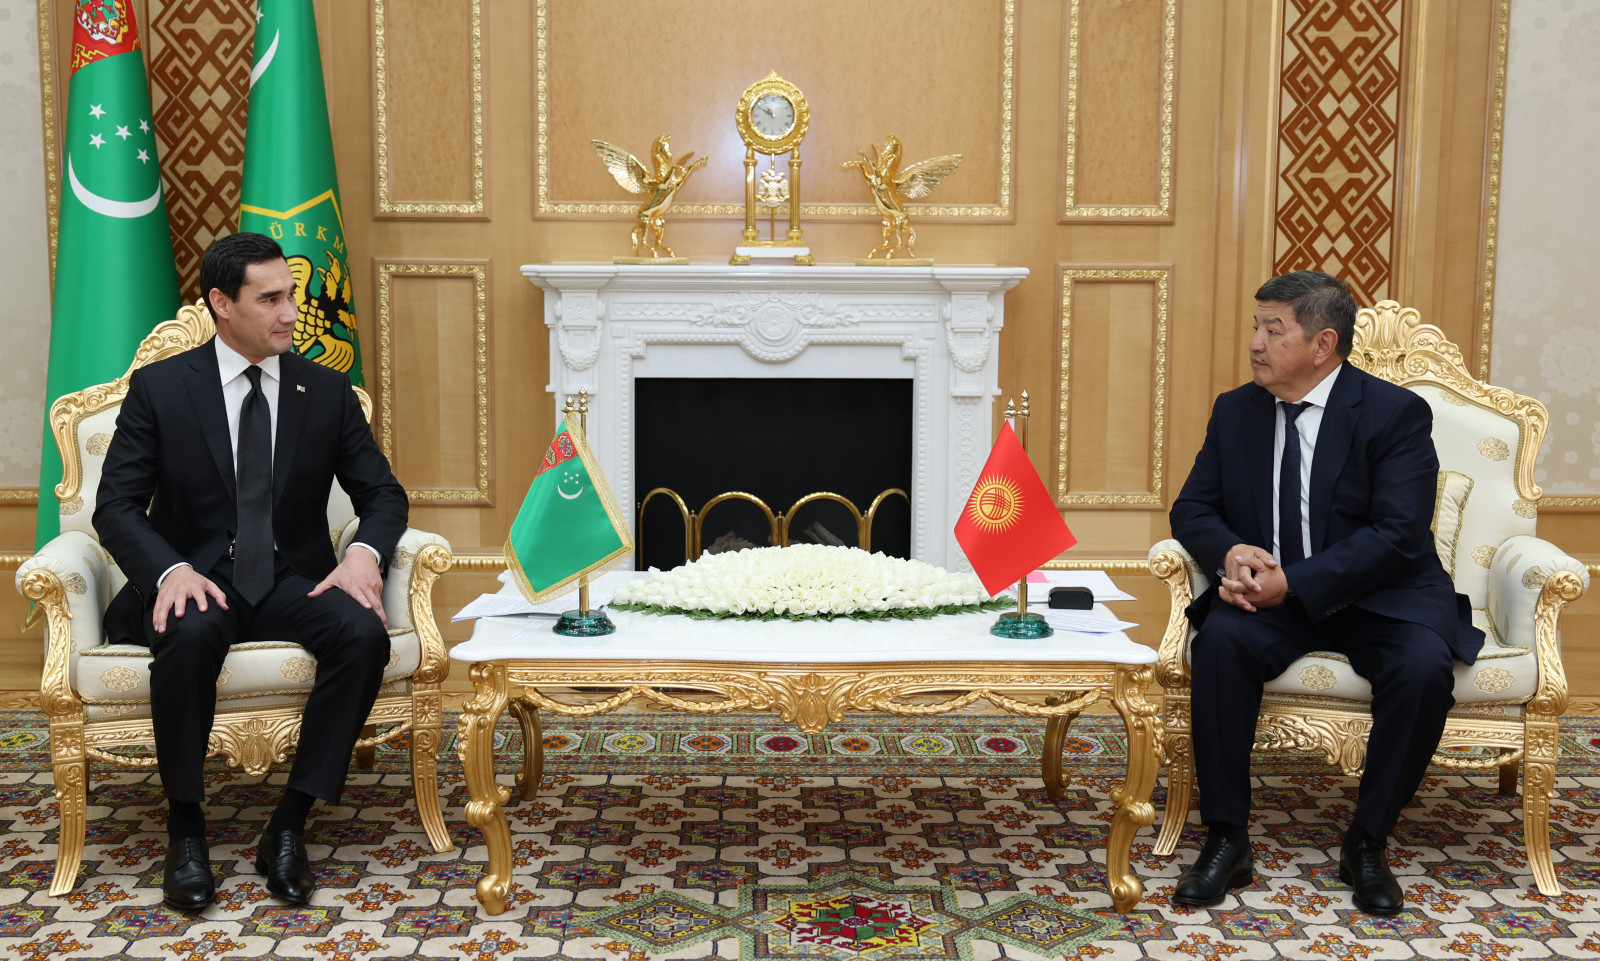 Kyrgyzstan-Turkmenistan trade turnover has untapped potential - cabinet chairman